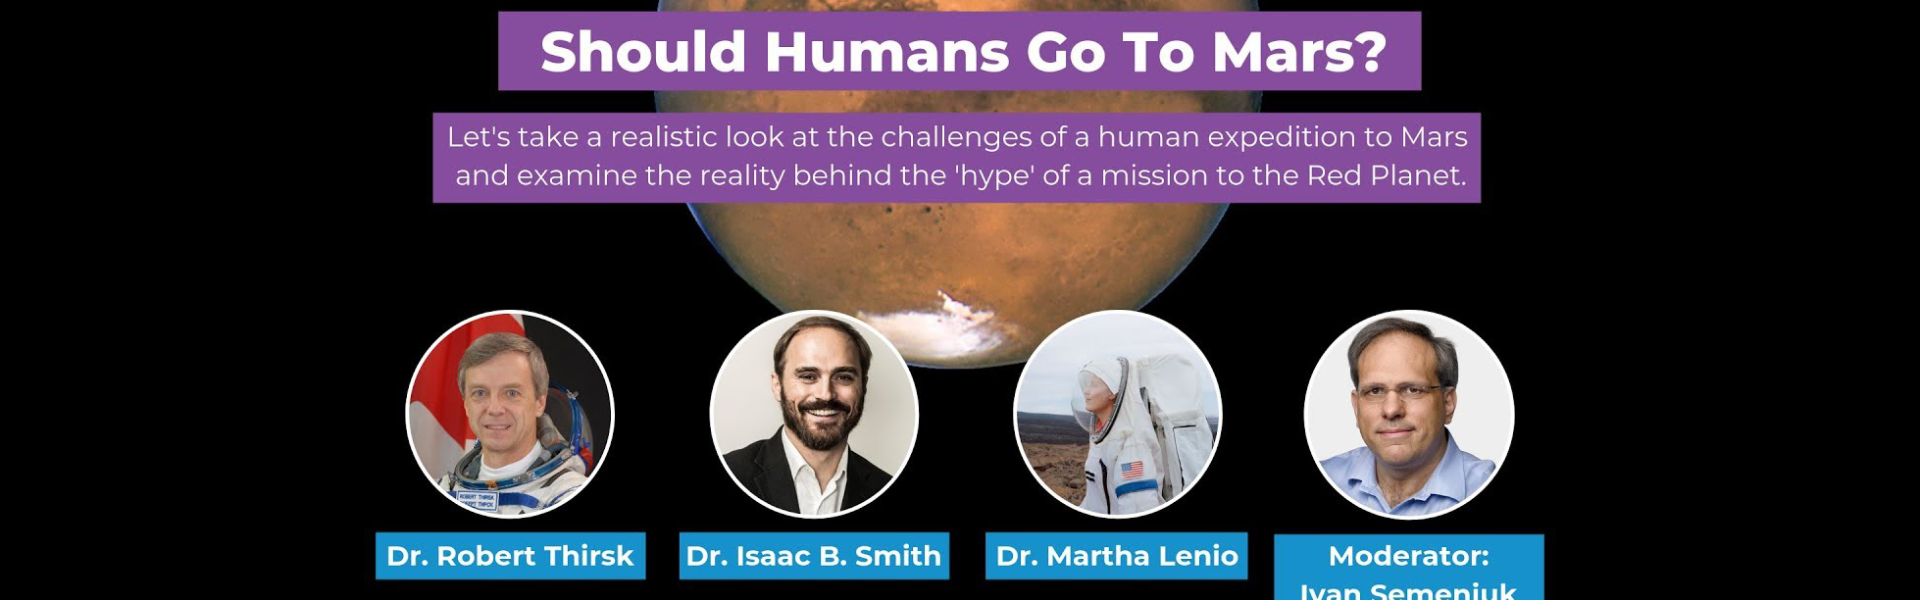 Should Humans Go To Mars?